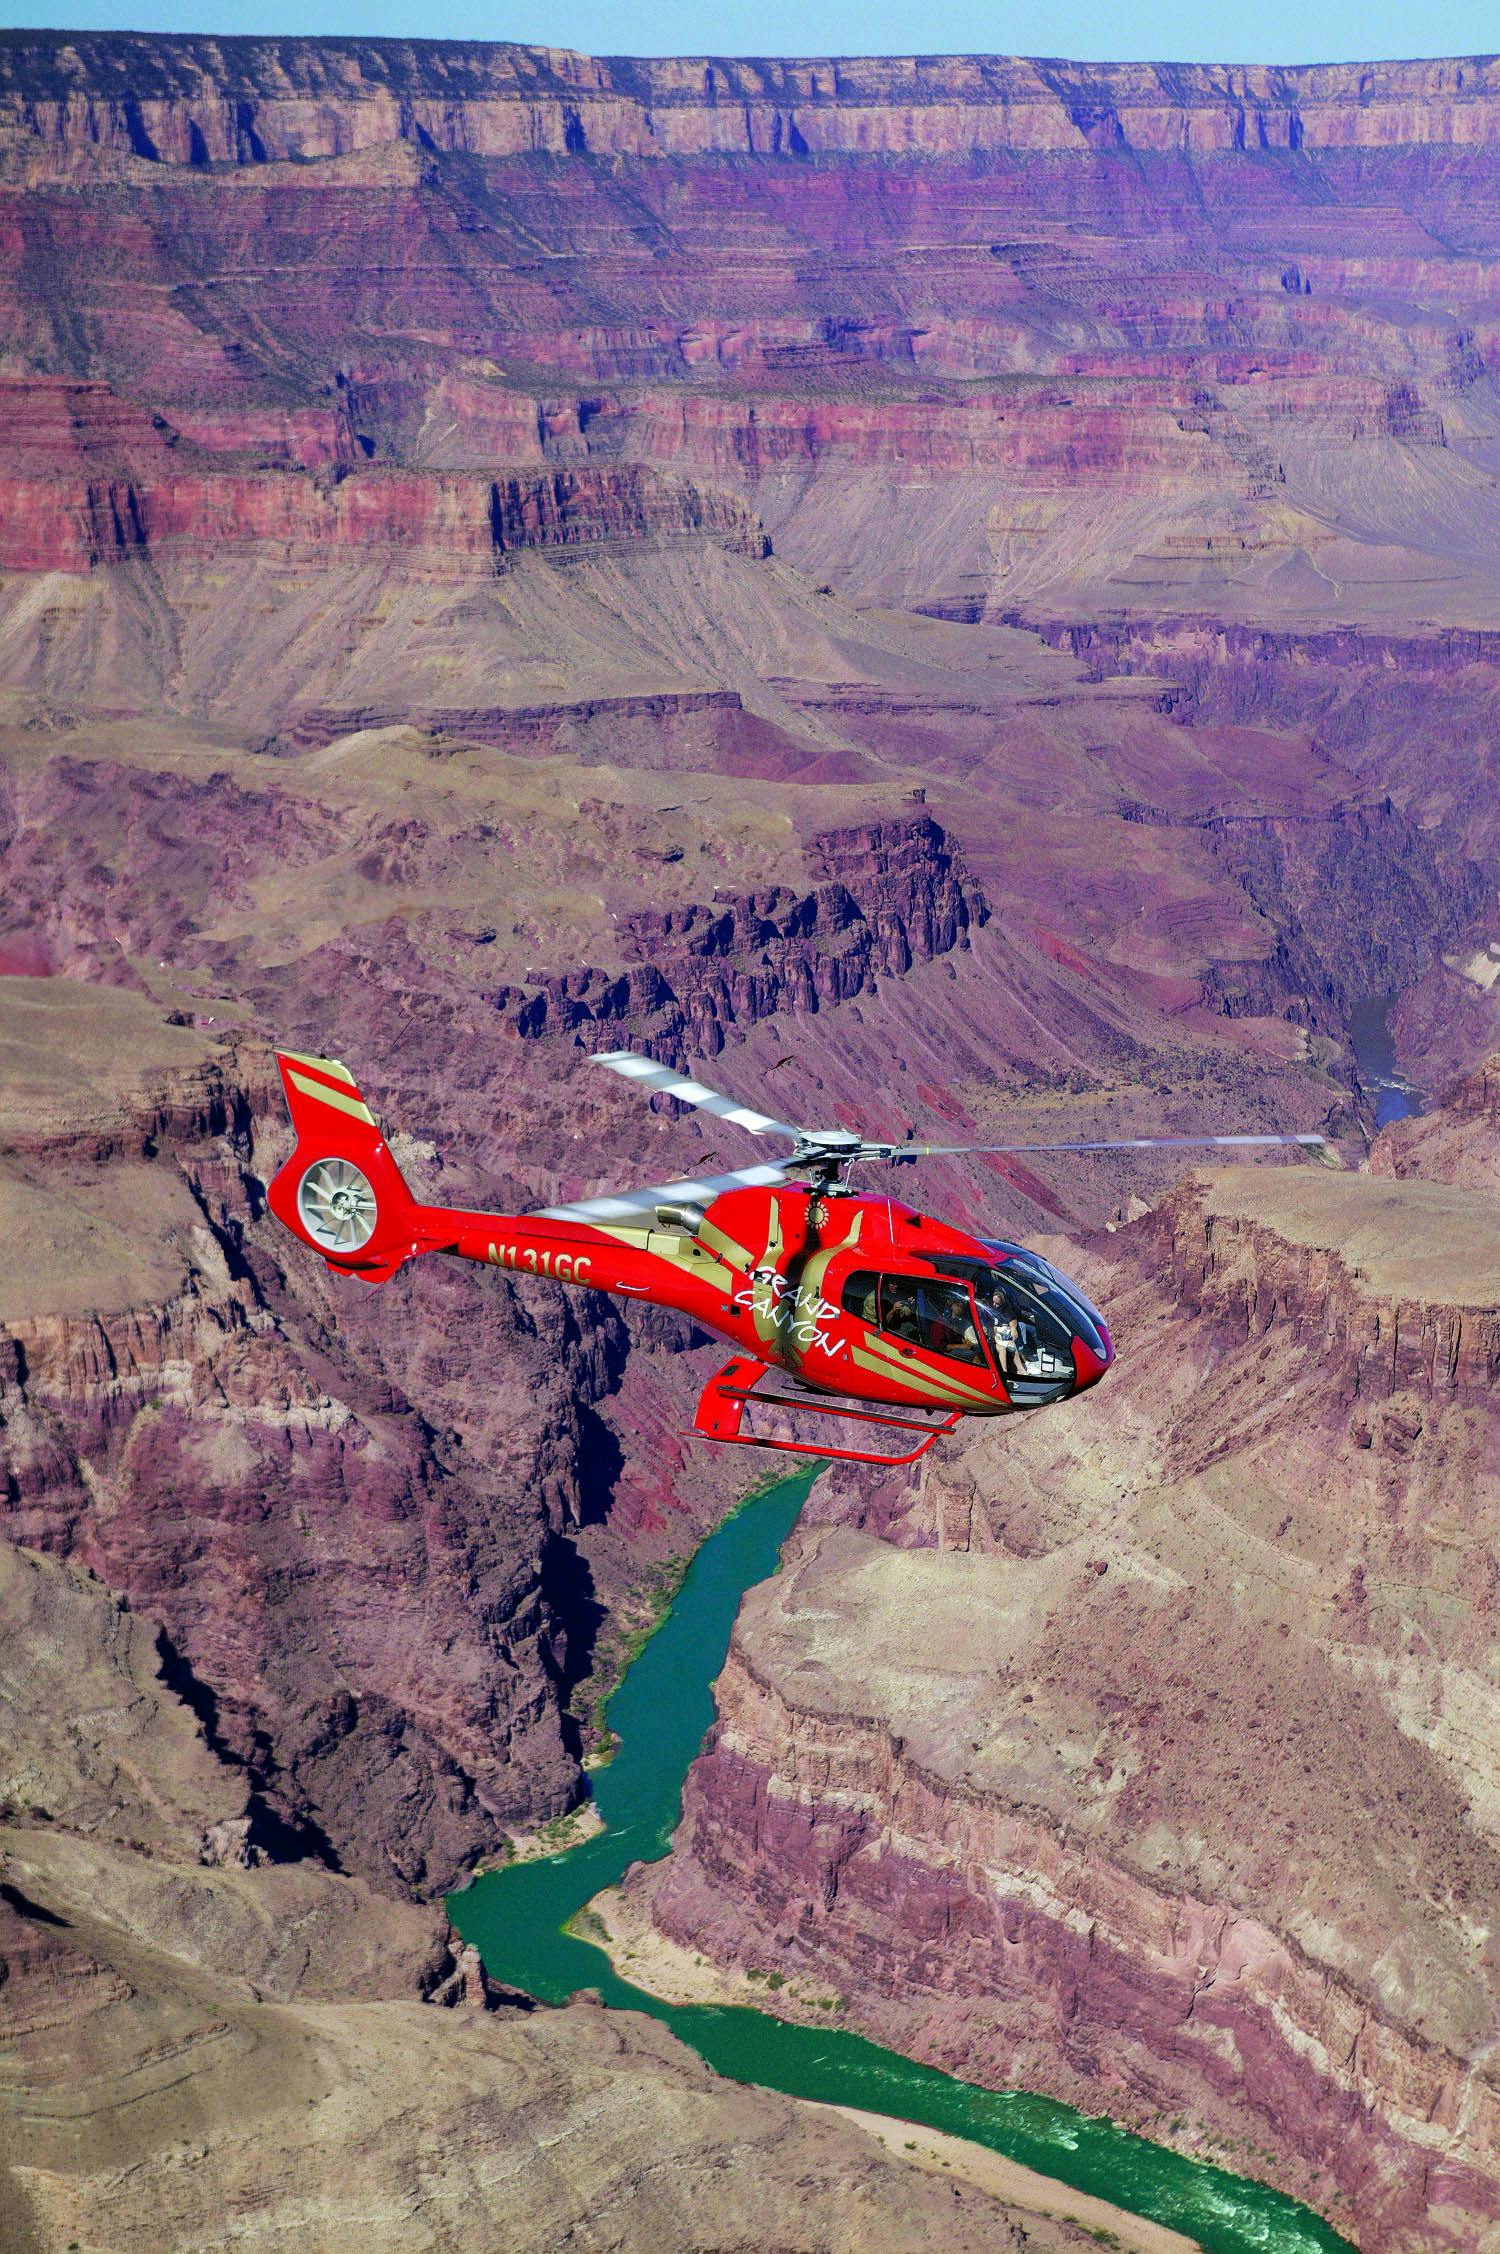 Grand Canyon South Rim bus tour and helicopter ride Musement